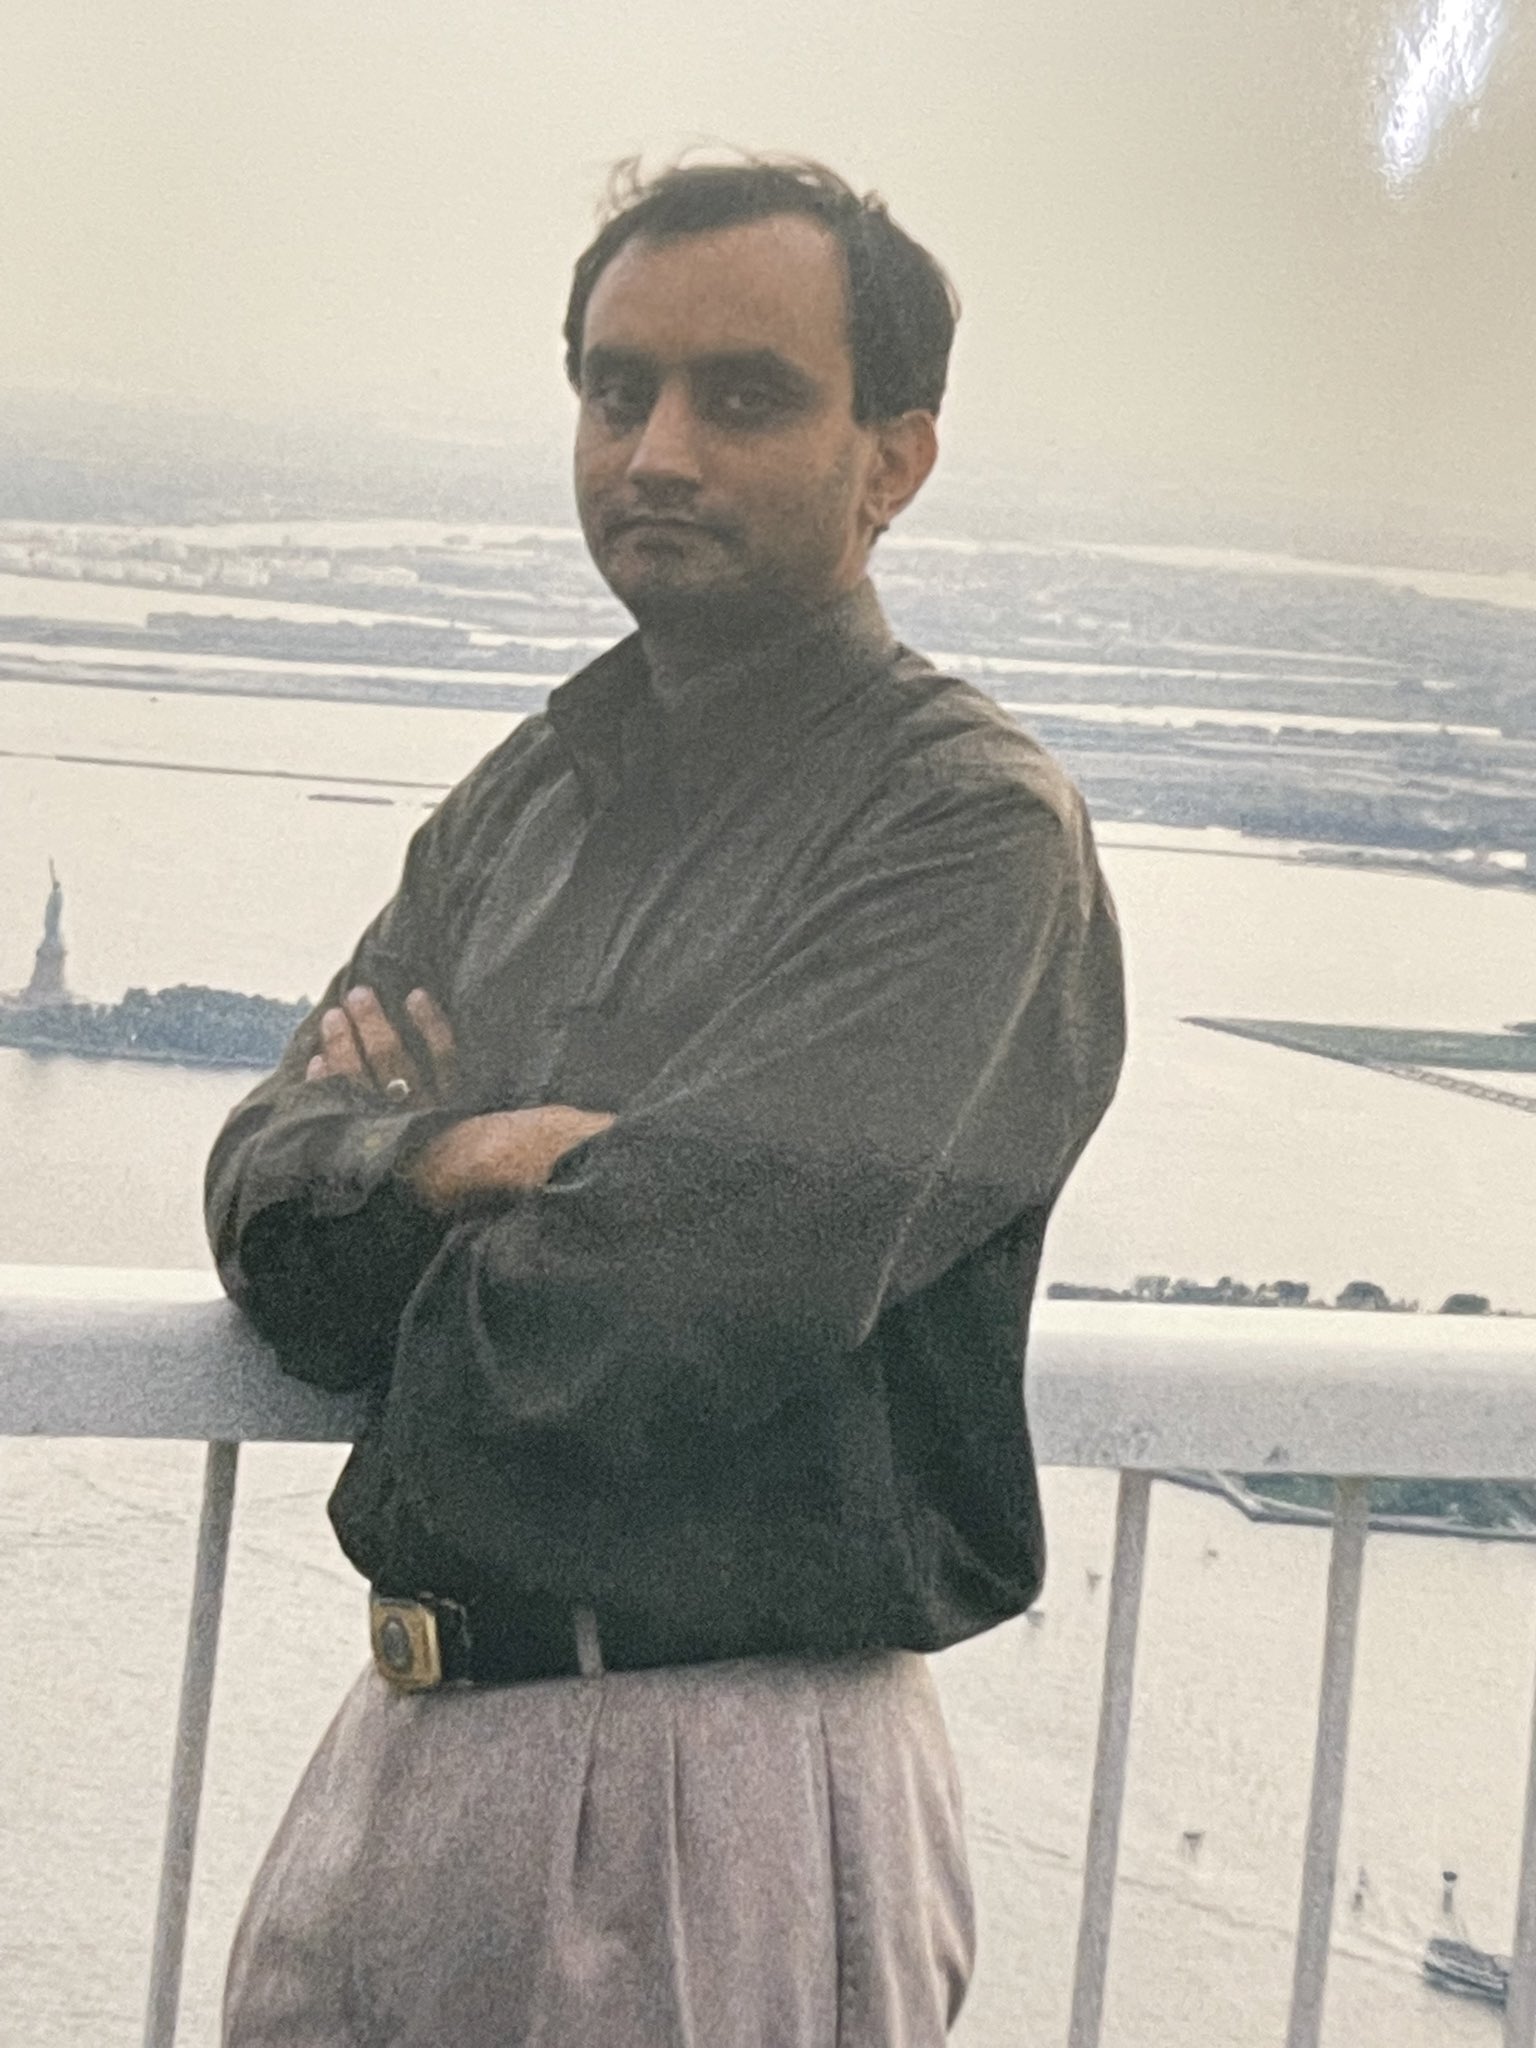 Sudanshu Trivedi in his earlier days at the world trade centre in New York